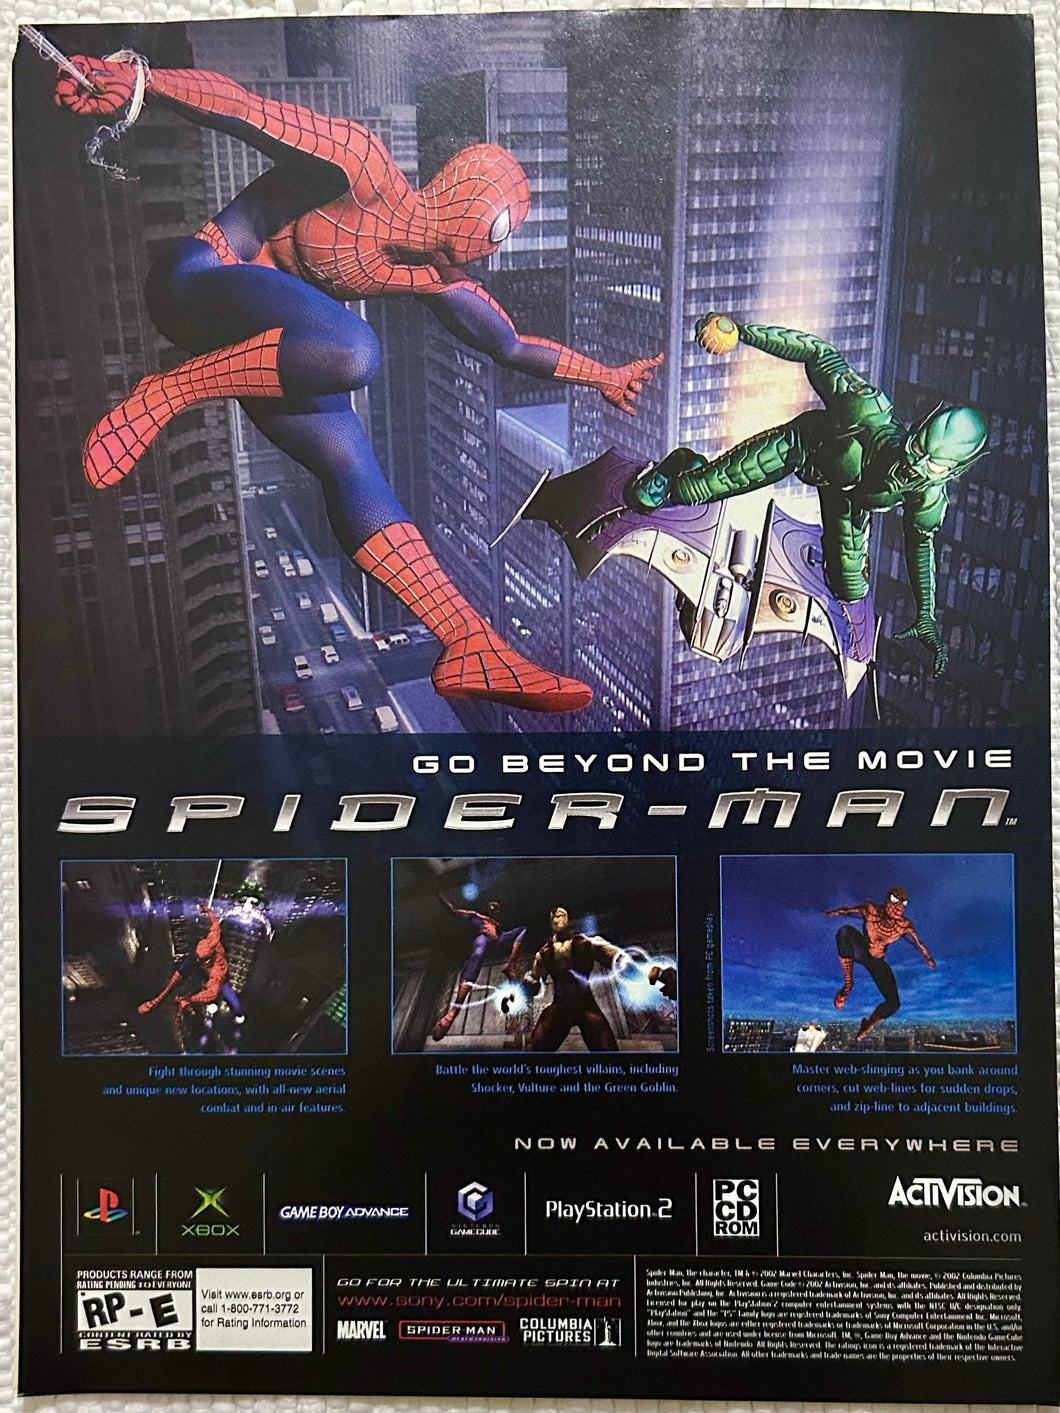 Spider-Man - PS2 NGC Xbox GBA PC - Original Vintage Advertisement - Print Ads - Laminated A4 Poster